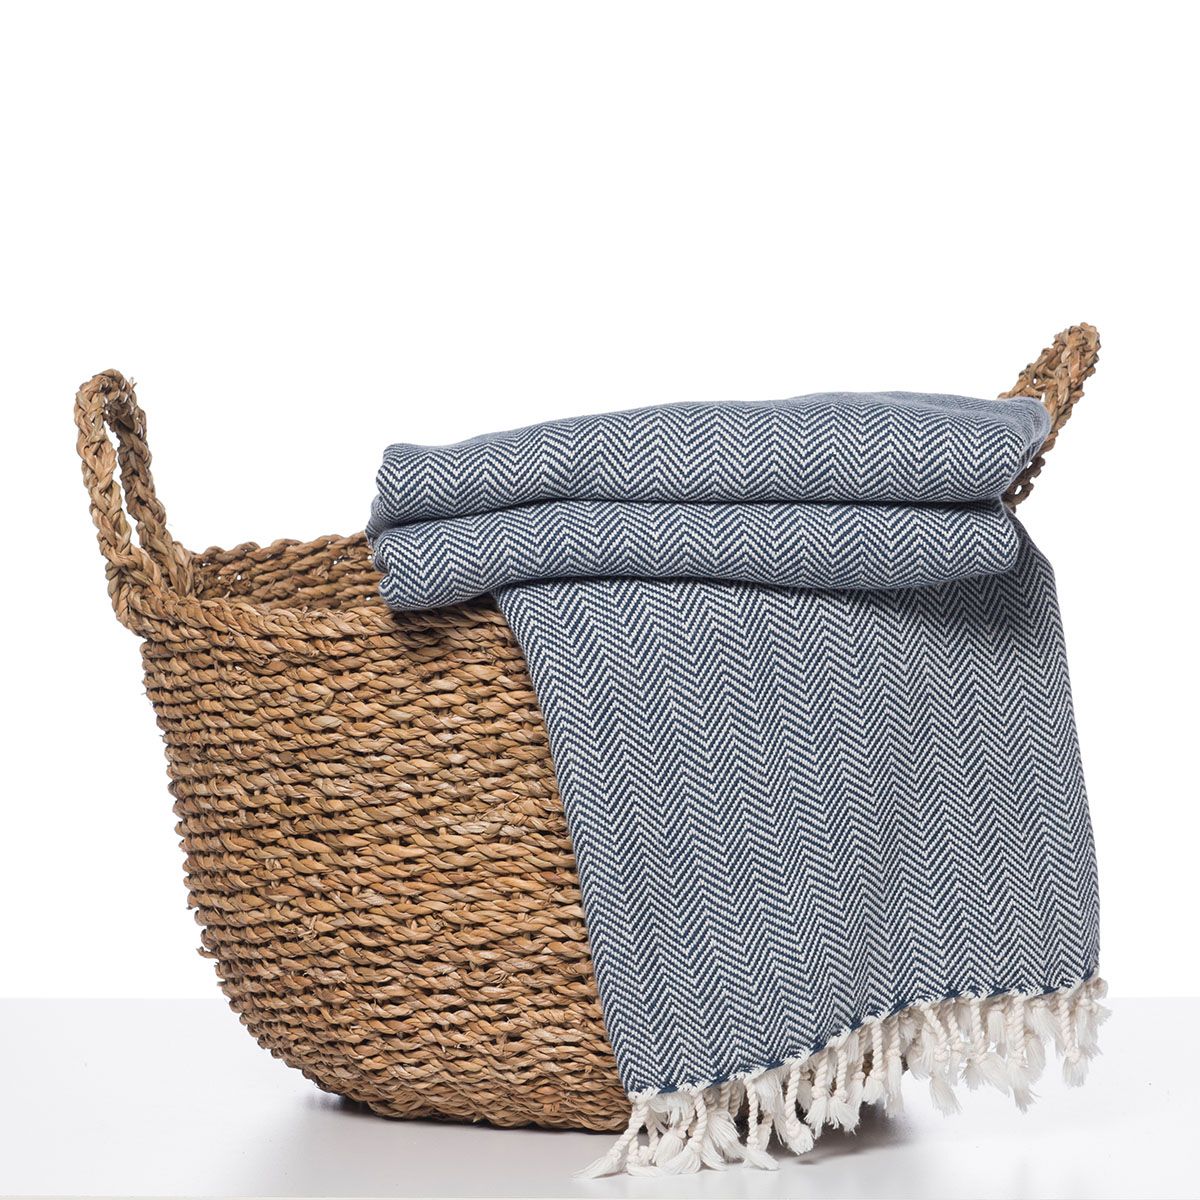 A gorgeous blanket made of 100% Turkish cotton in a herringbone pattern.